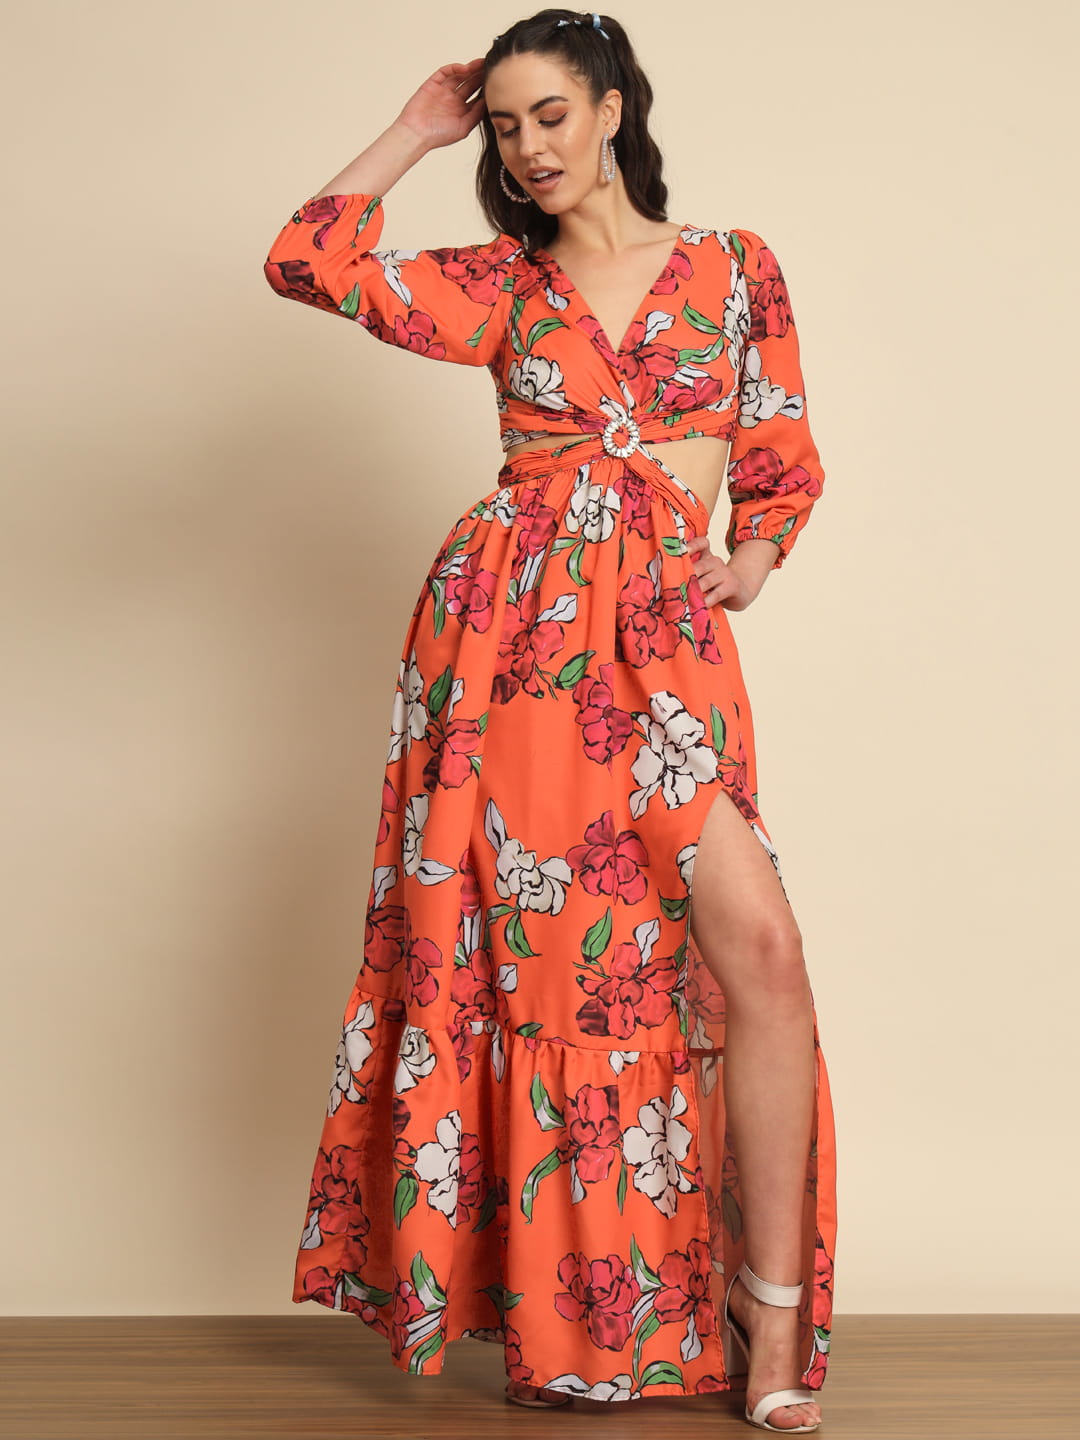 Sunset Whispers: An Orange Cutout Dress with Knot Detail | Hues of India